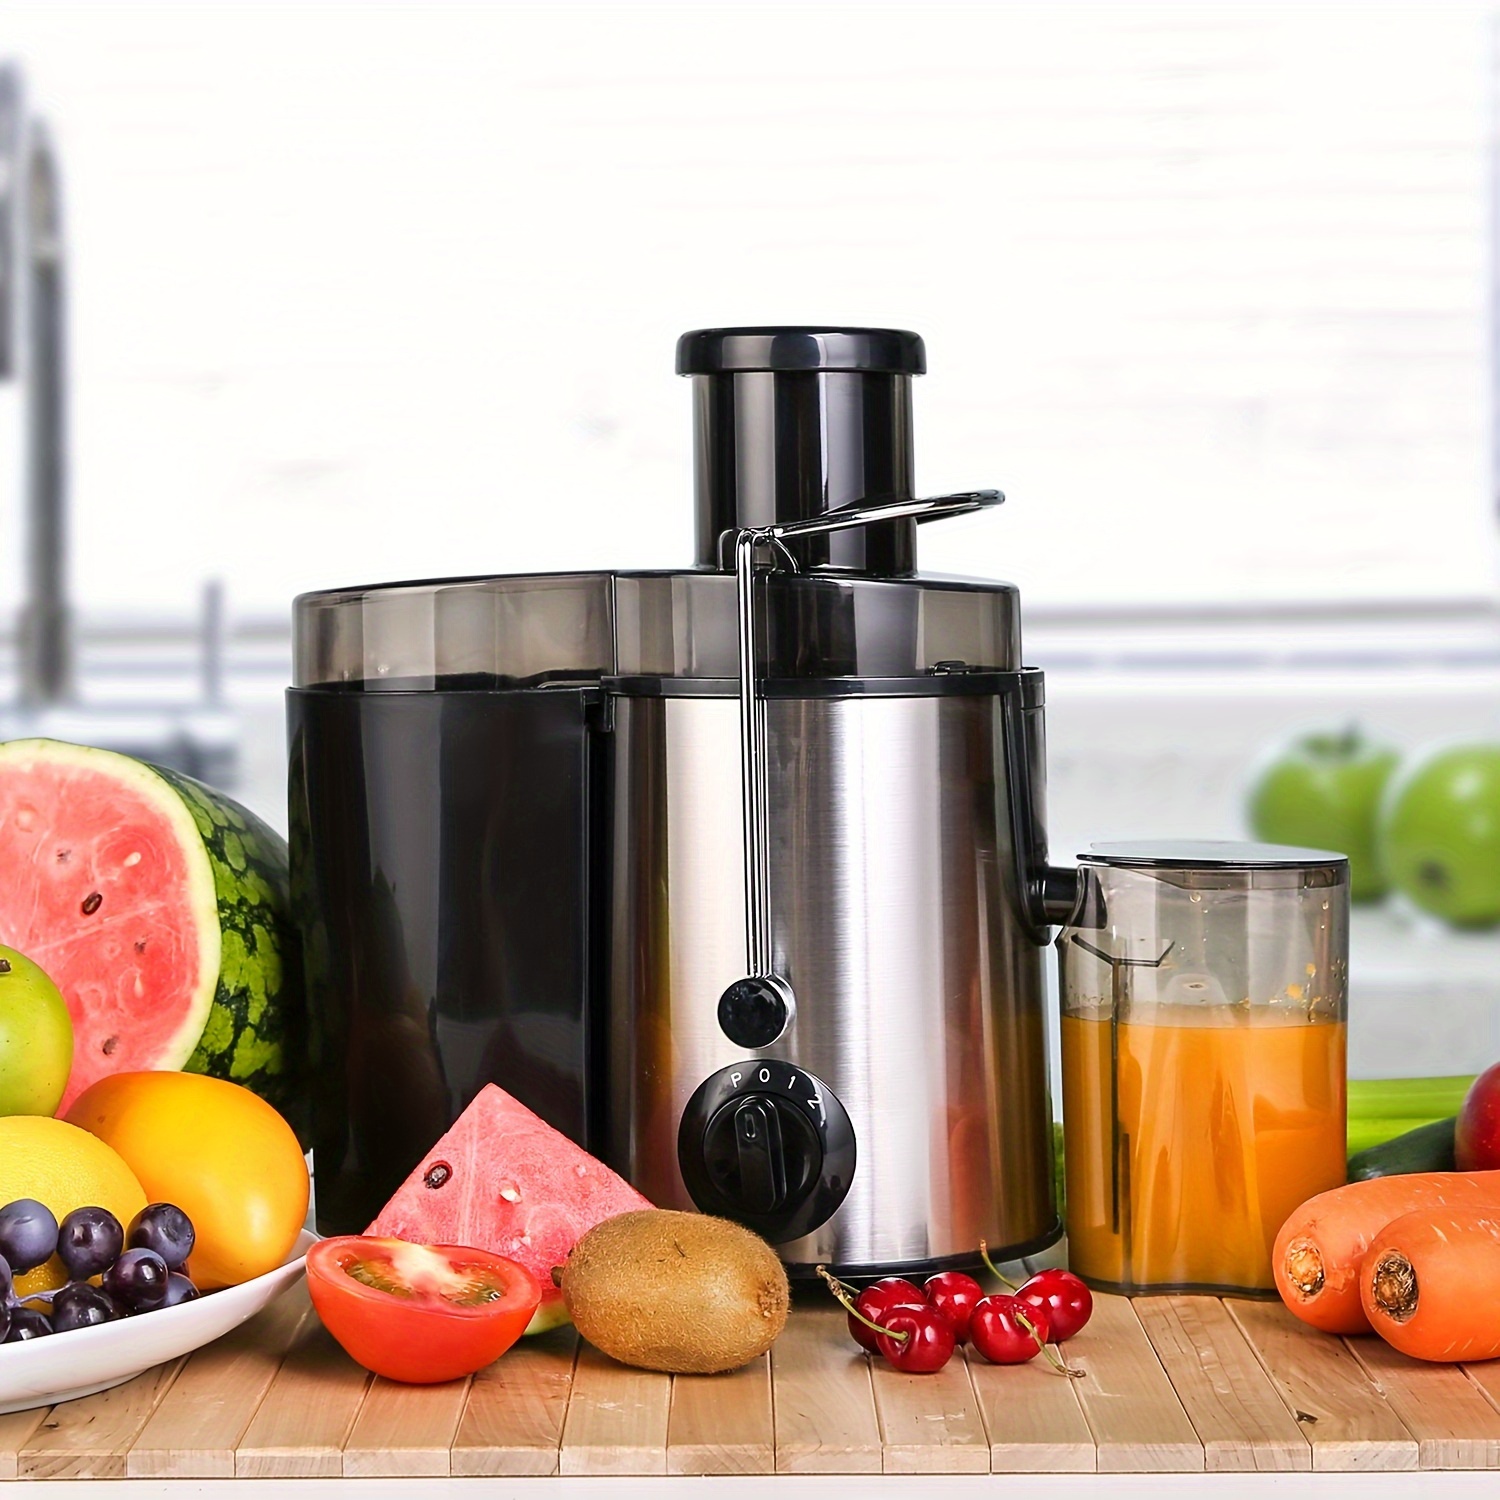 

Juicer Machine, 400w Juicer With Big Mouth Large 3 In Feed Chute For Whole Fruit And Vegetables Easy To Clean, Stainless Steel Centrifugal Juicer, Bpa Free, Nonslip Feet, Silver